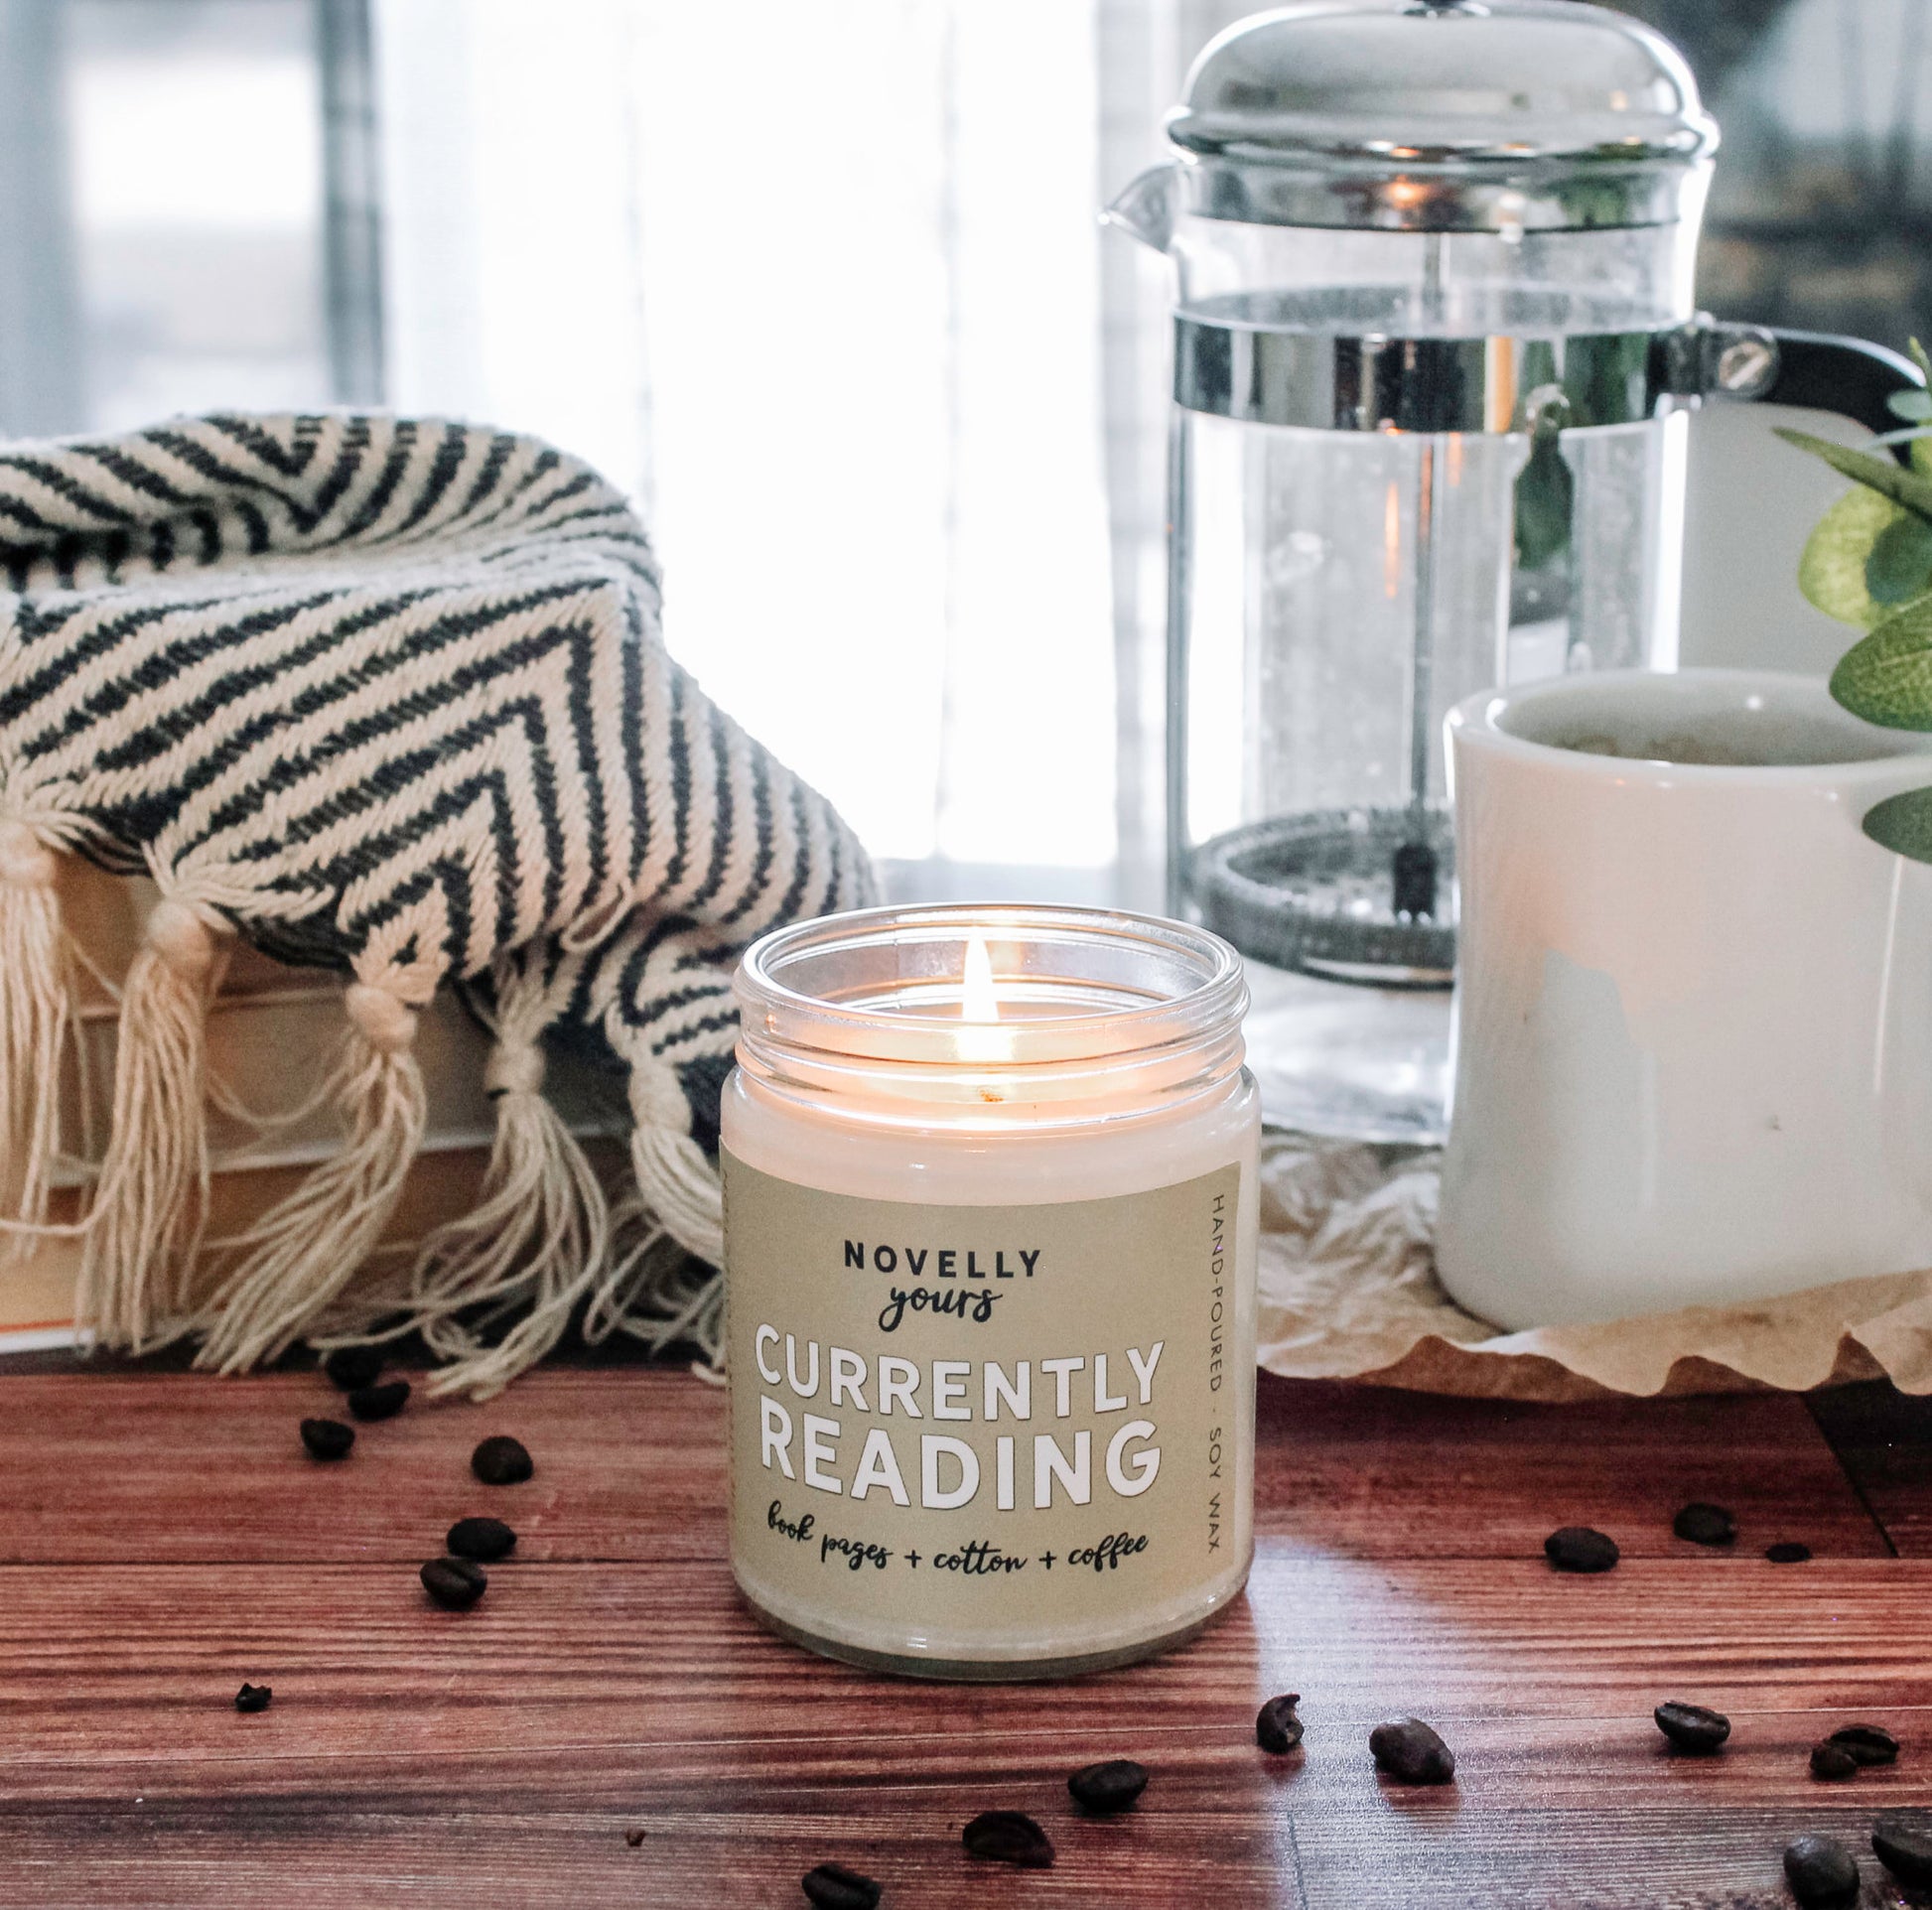 scented soy wax candle featuring "currently reading" title on a tan label on a decorative background